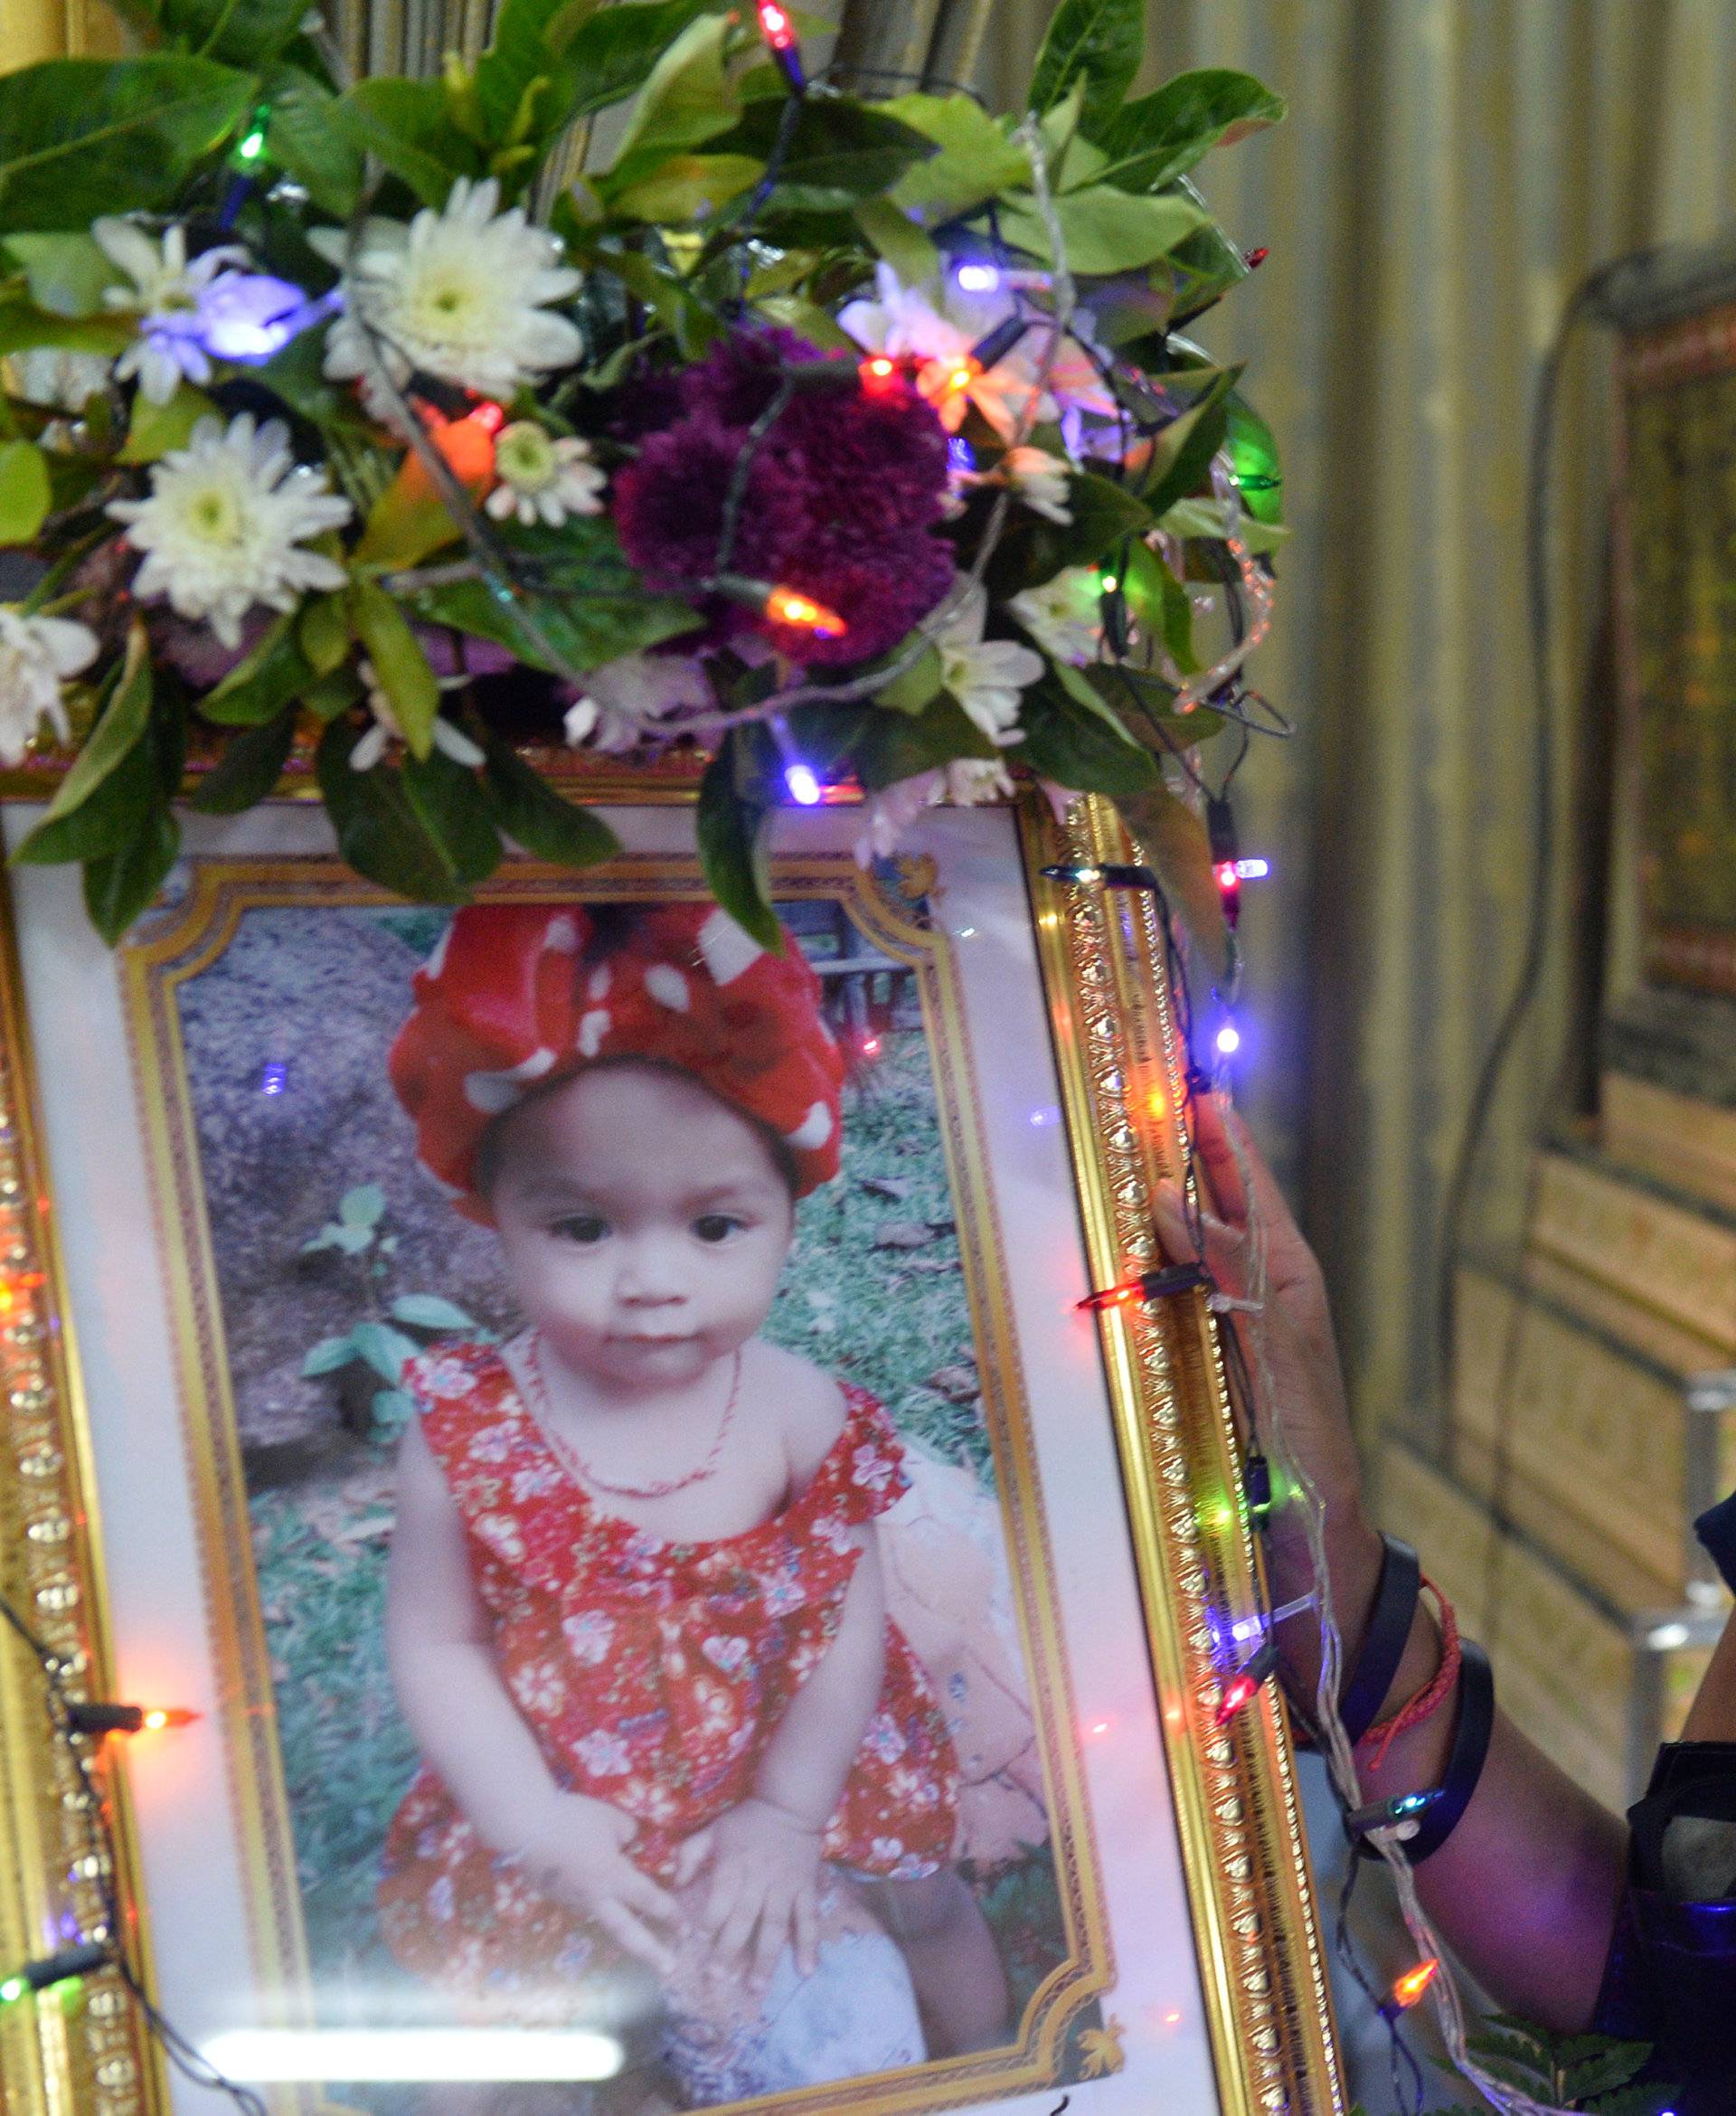 Jiranuch Trirat, mother of 11-month-old daughter who was killed by her father, stands next to a picture of her daughter at a temple in Phuket